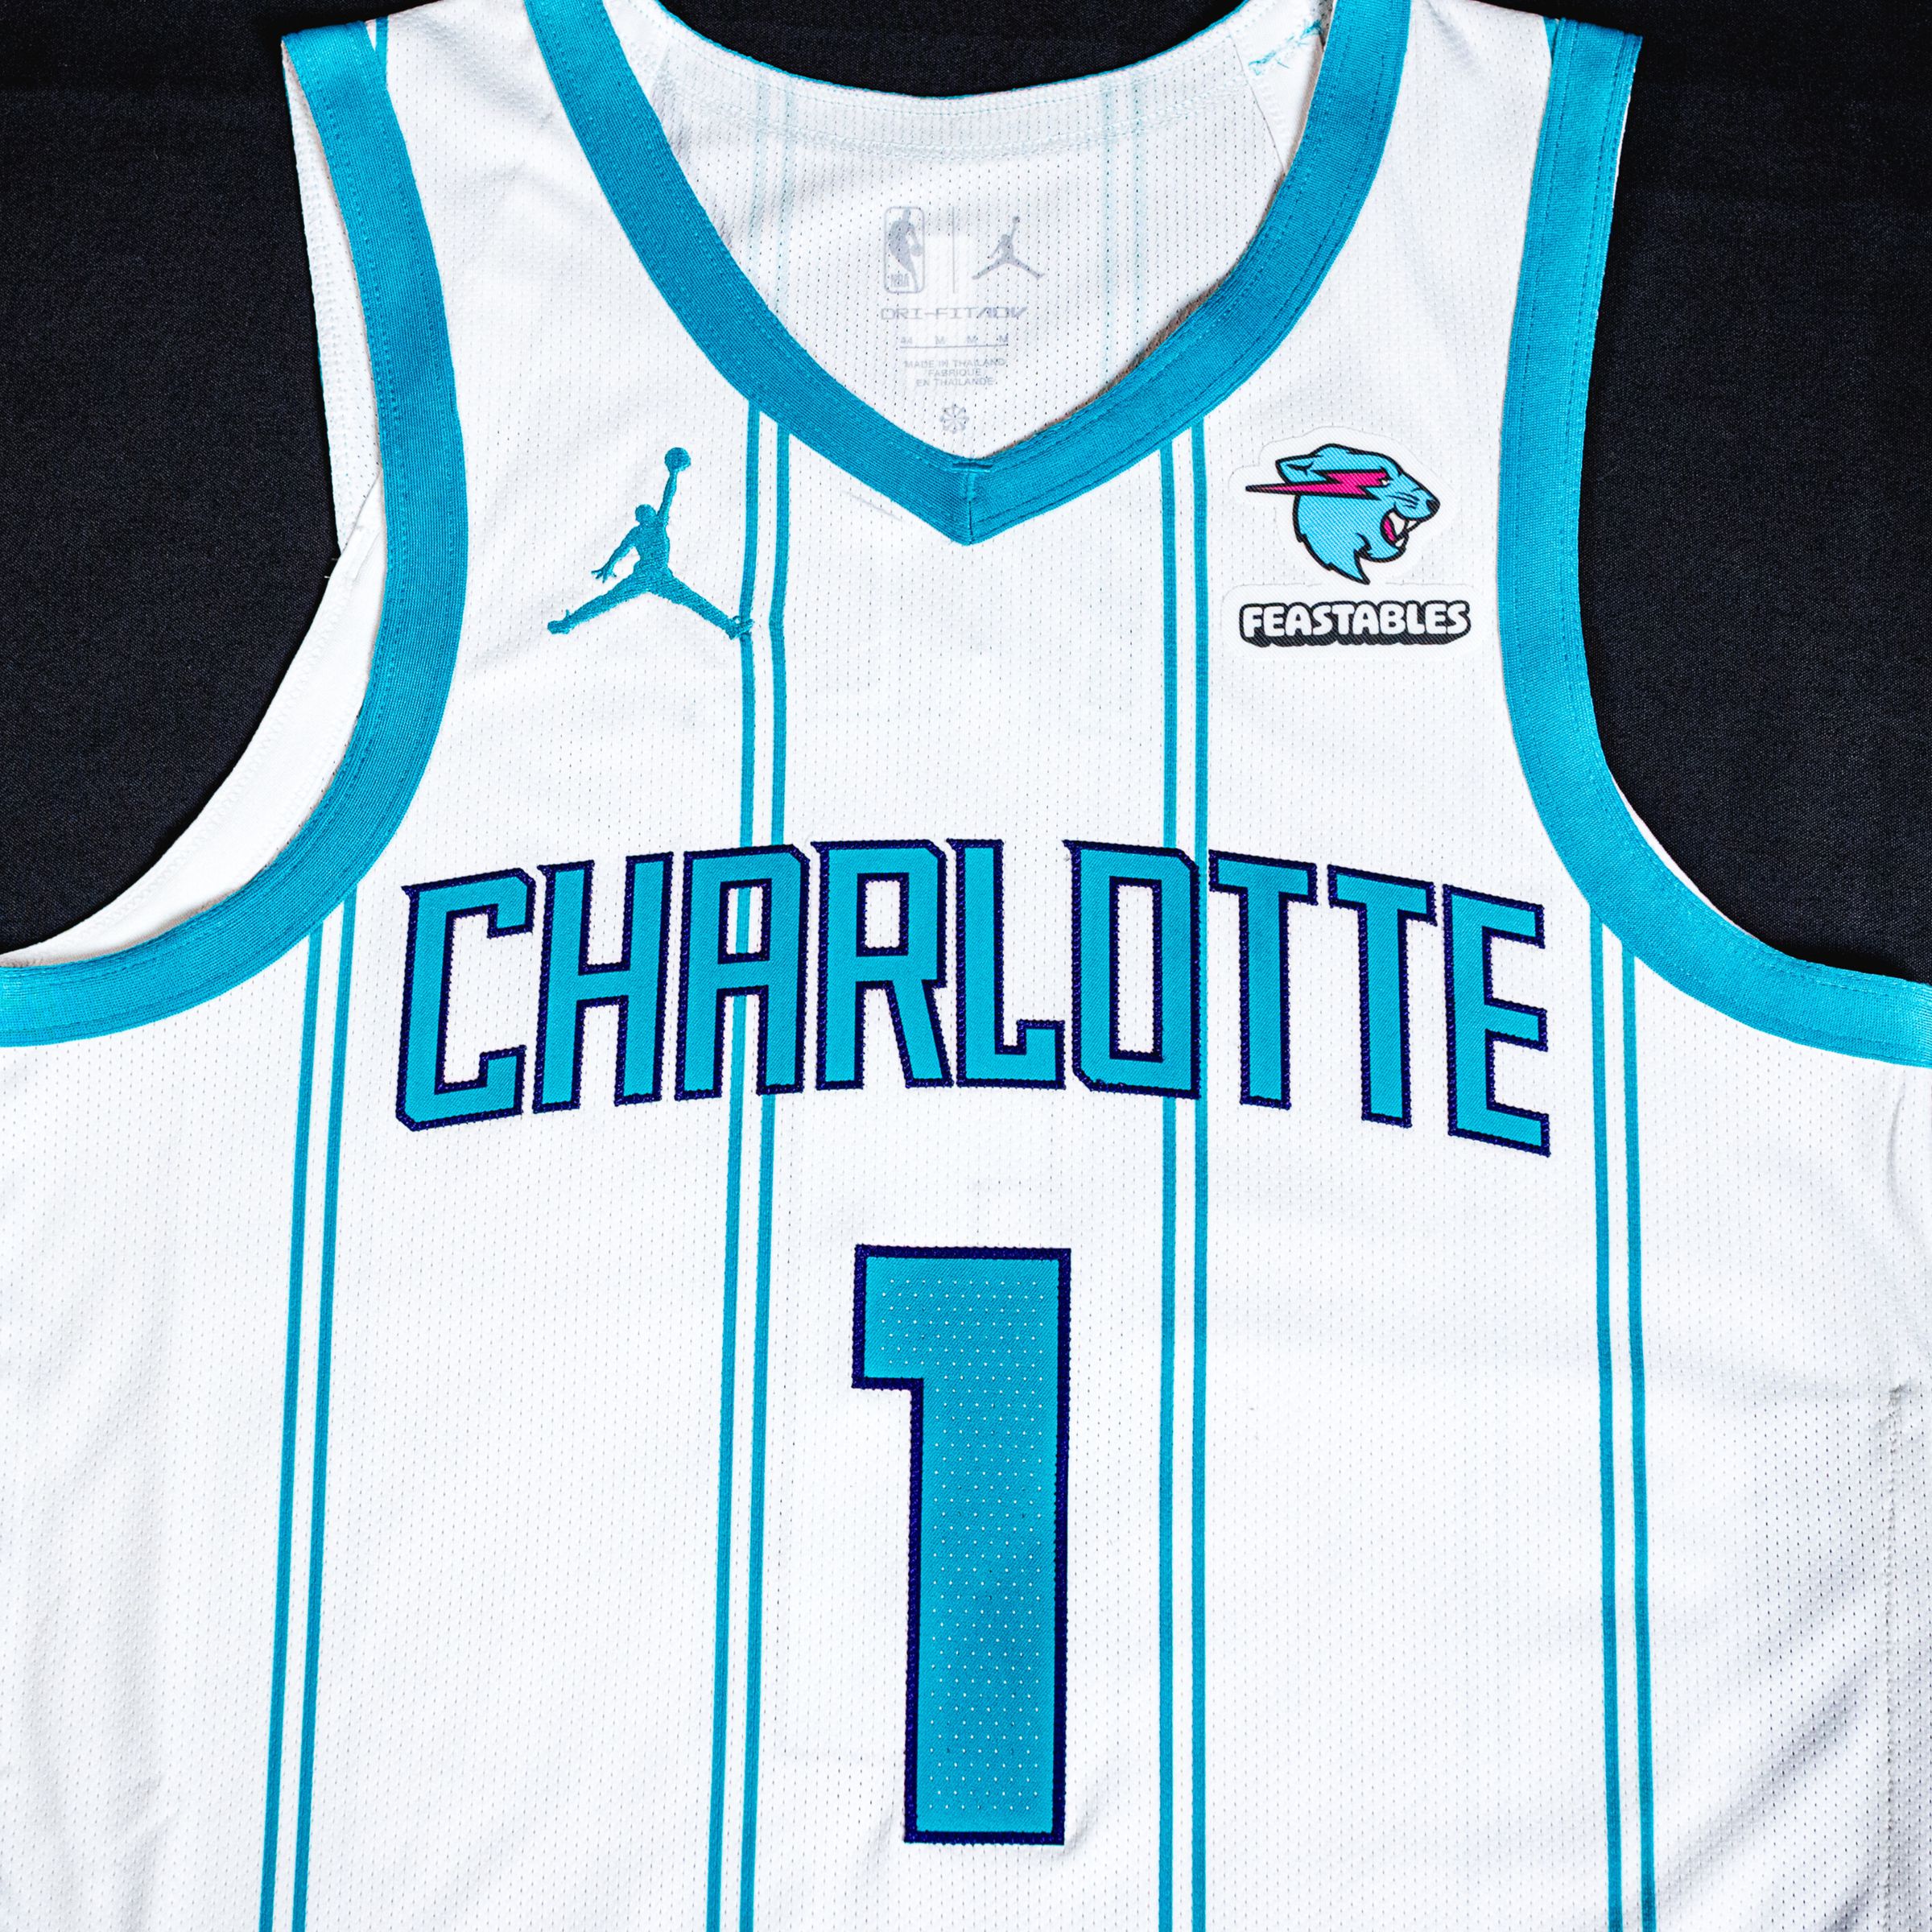 A photo of the Feastables logo on a Charlotte Hornets jersey